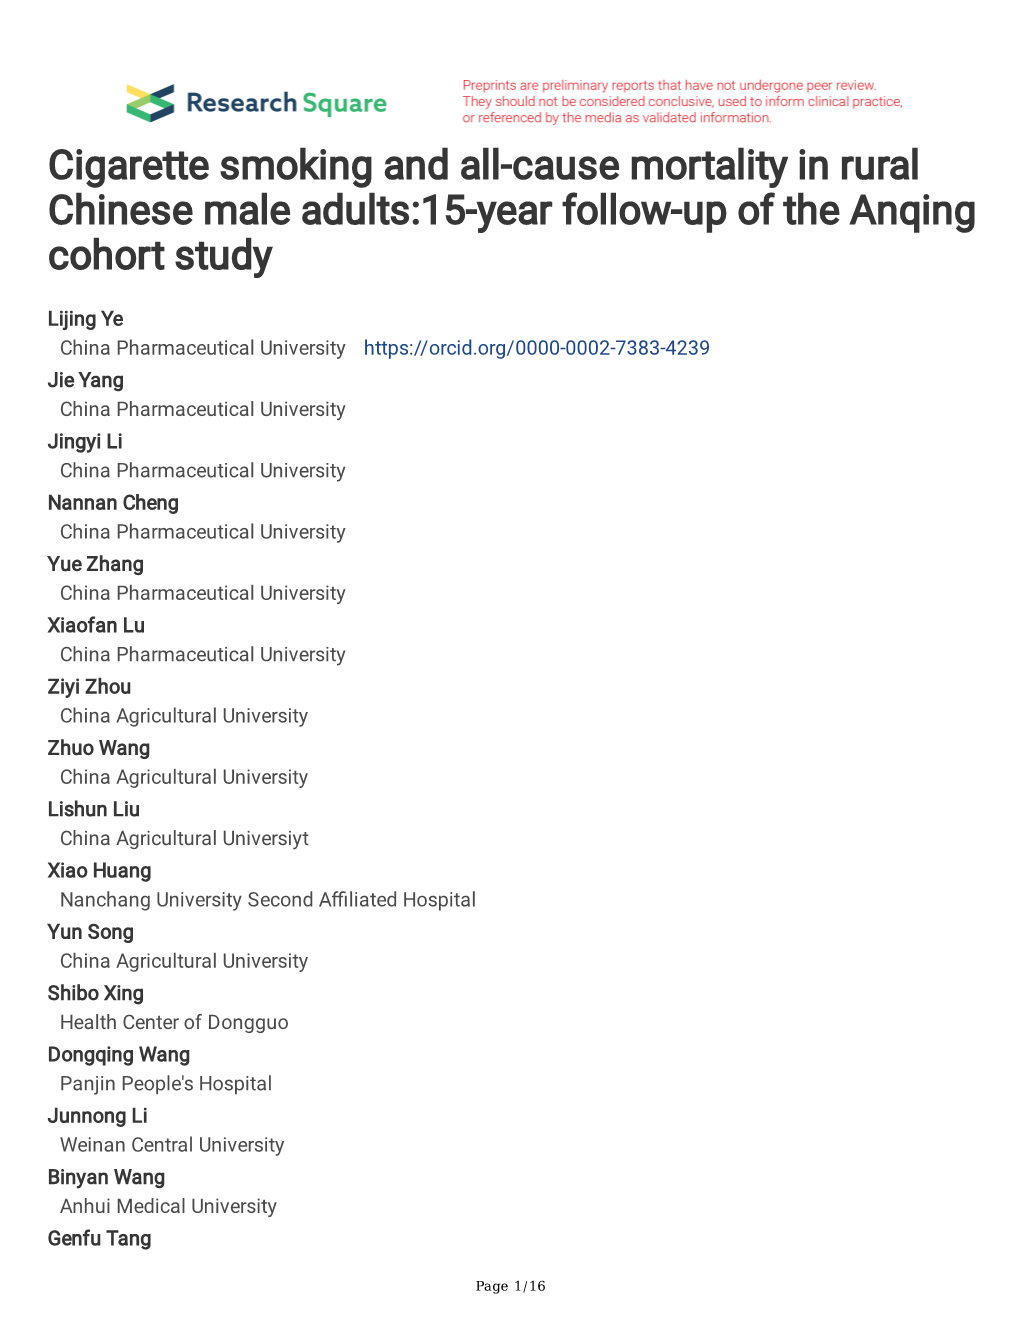 Cigarette Smoking and All-Cause Mortality in Rural Chinese Male Adults:15-Year Follow-Up of the Anqing Cohort Study